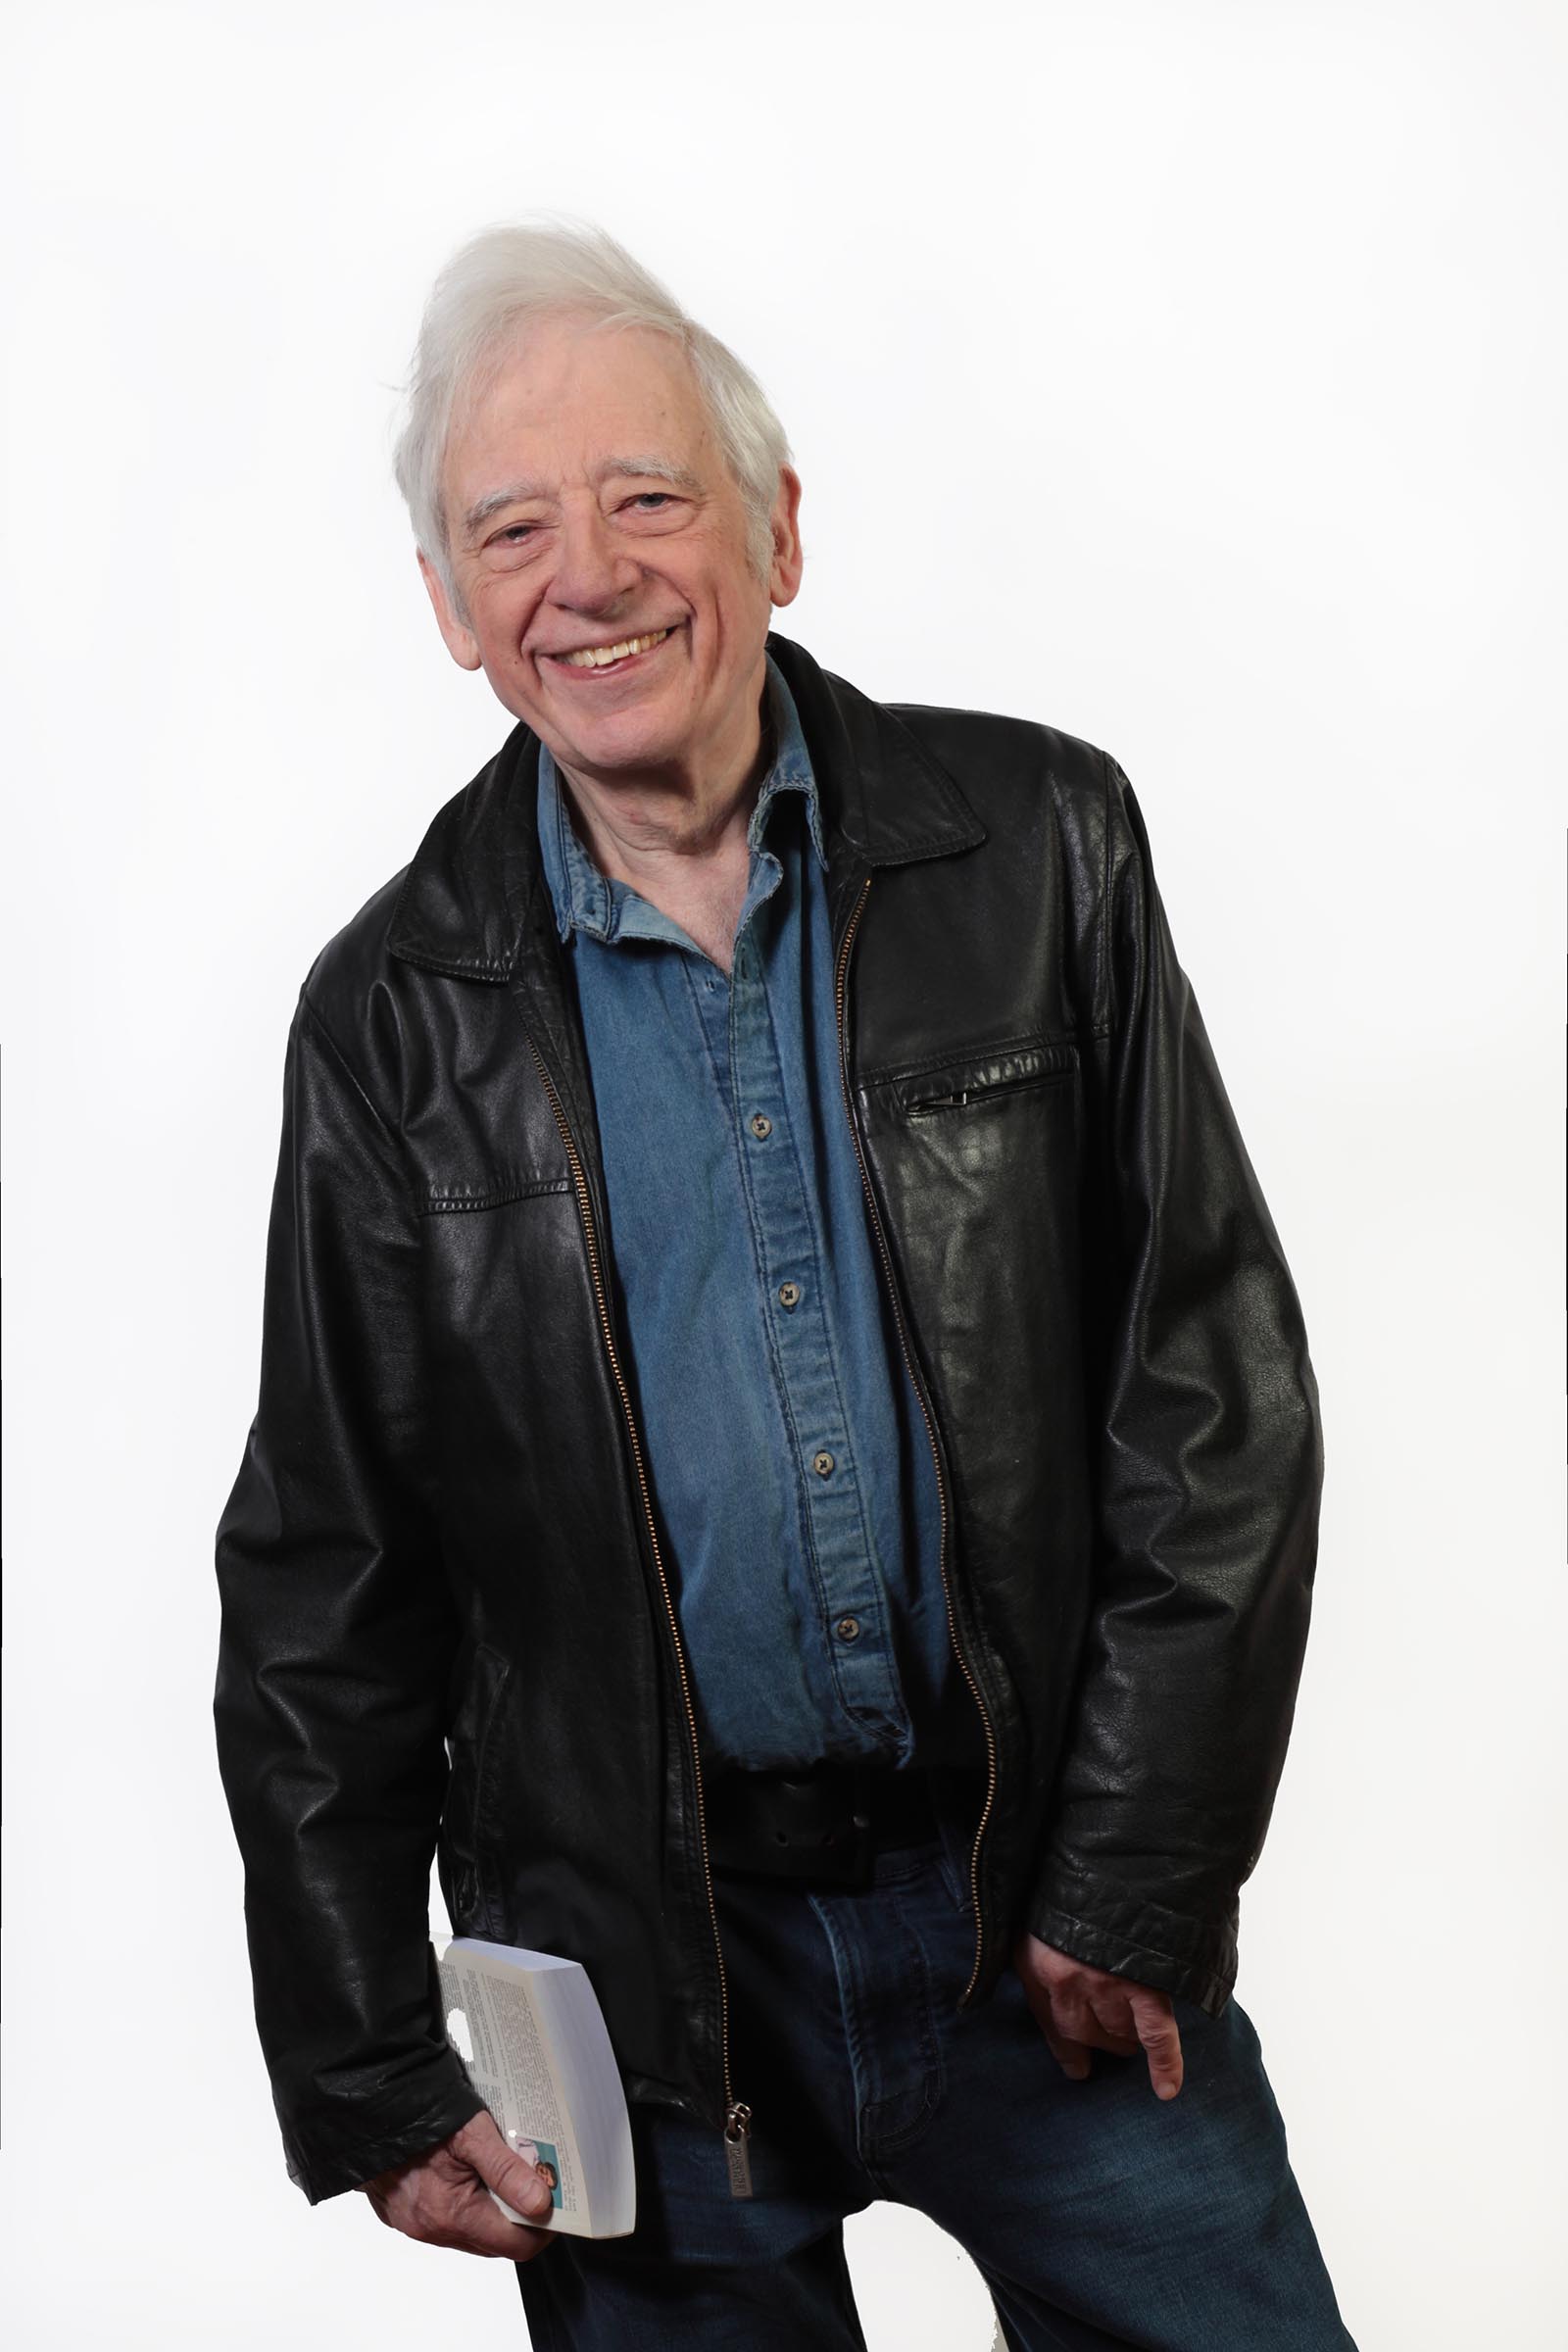 Austin Pendleton, NYC Actor, Austin Campbell Pendleton (born March 27, 1940) is an American actor, playwright, theater director, and instructor. He is known as a proliflic character actor on the stage and screen who has appeared in films including Catch 22 (1970), What